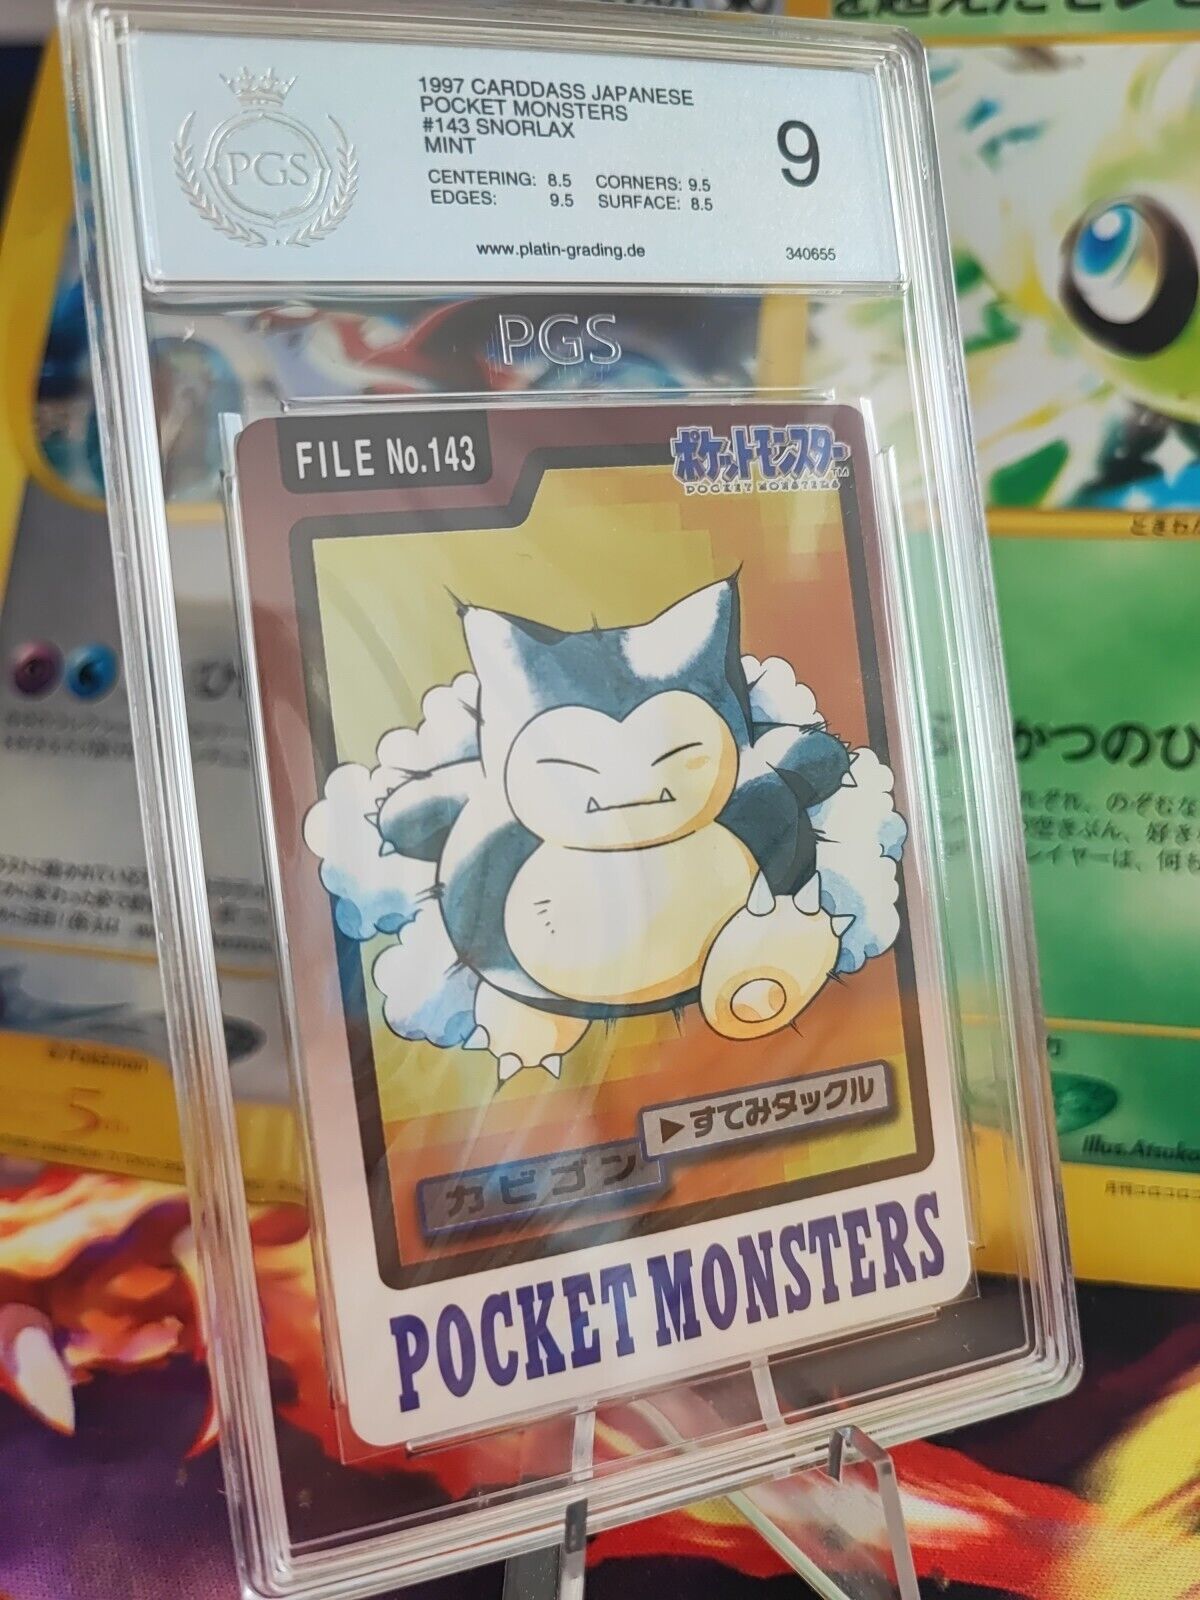 Pokemon Card Card Snorlax Relax Pocket Monsters Carddass 97 PGS PSA 9 japaness